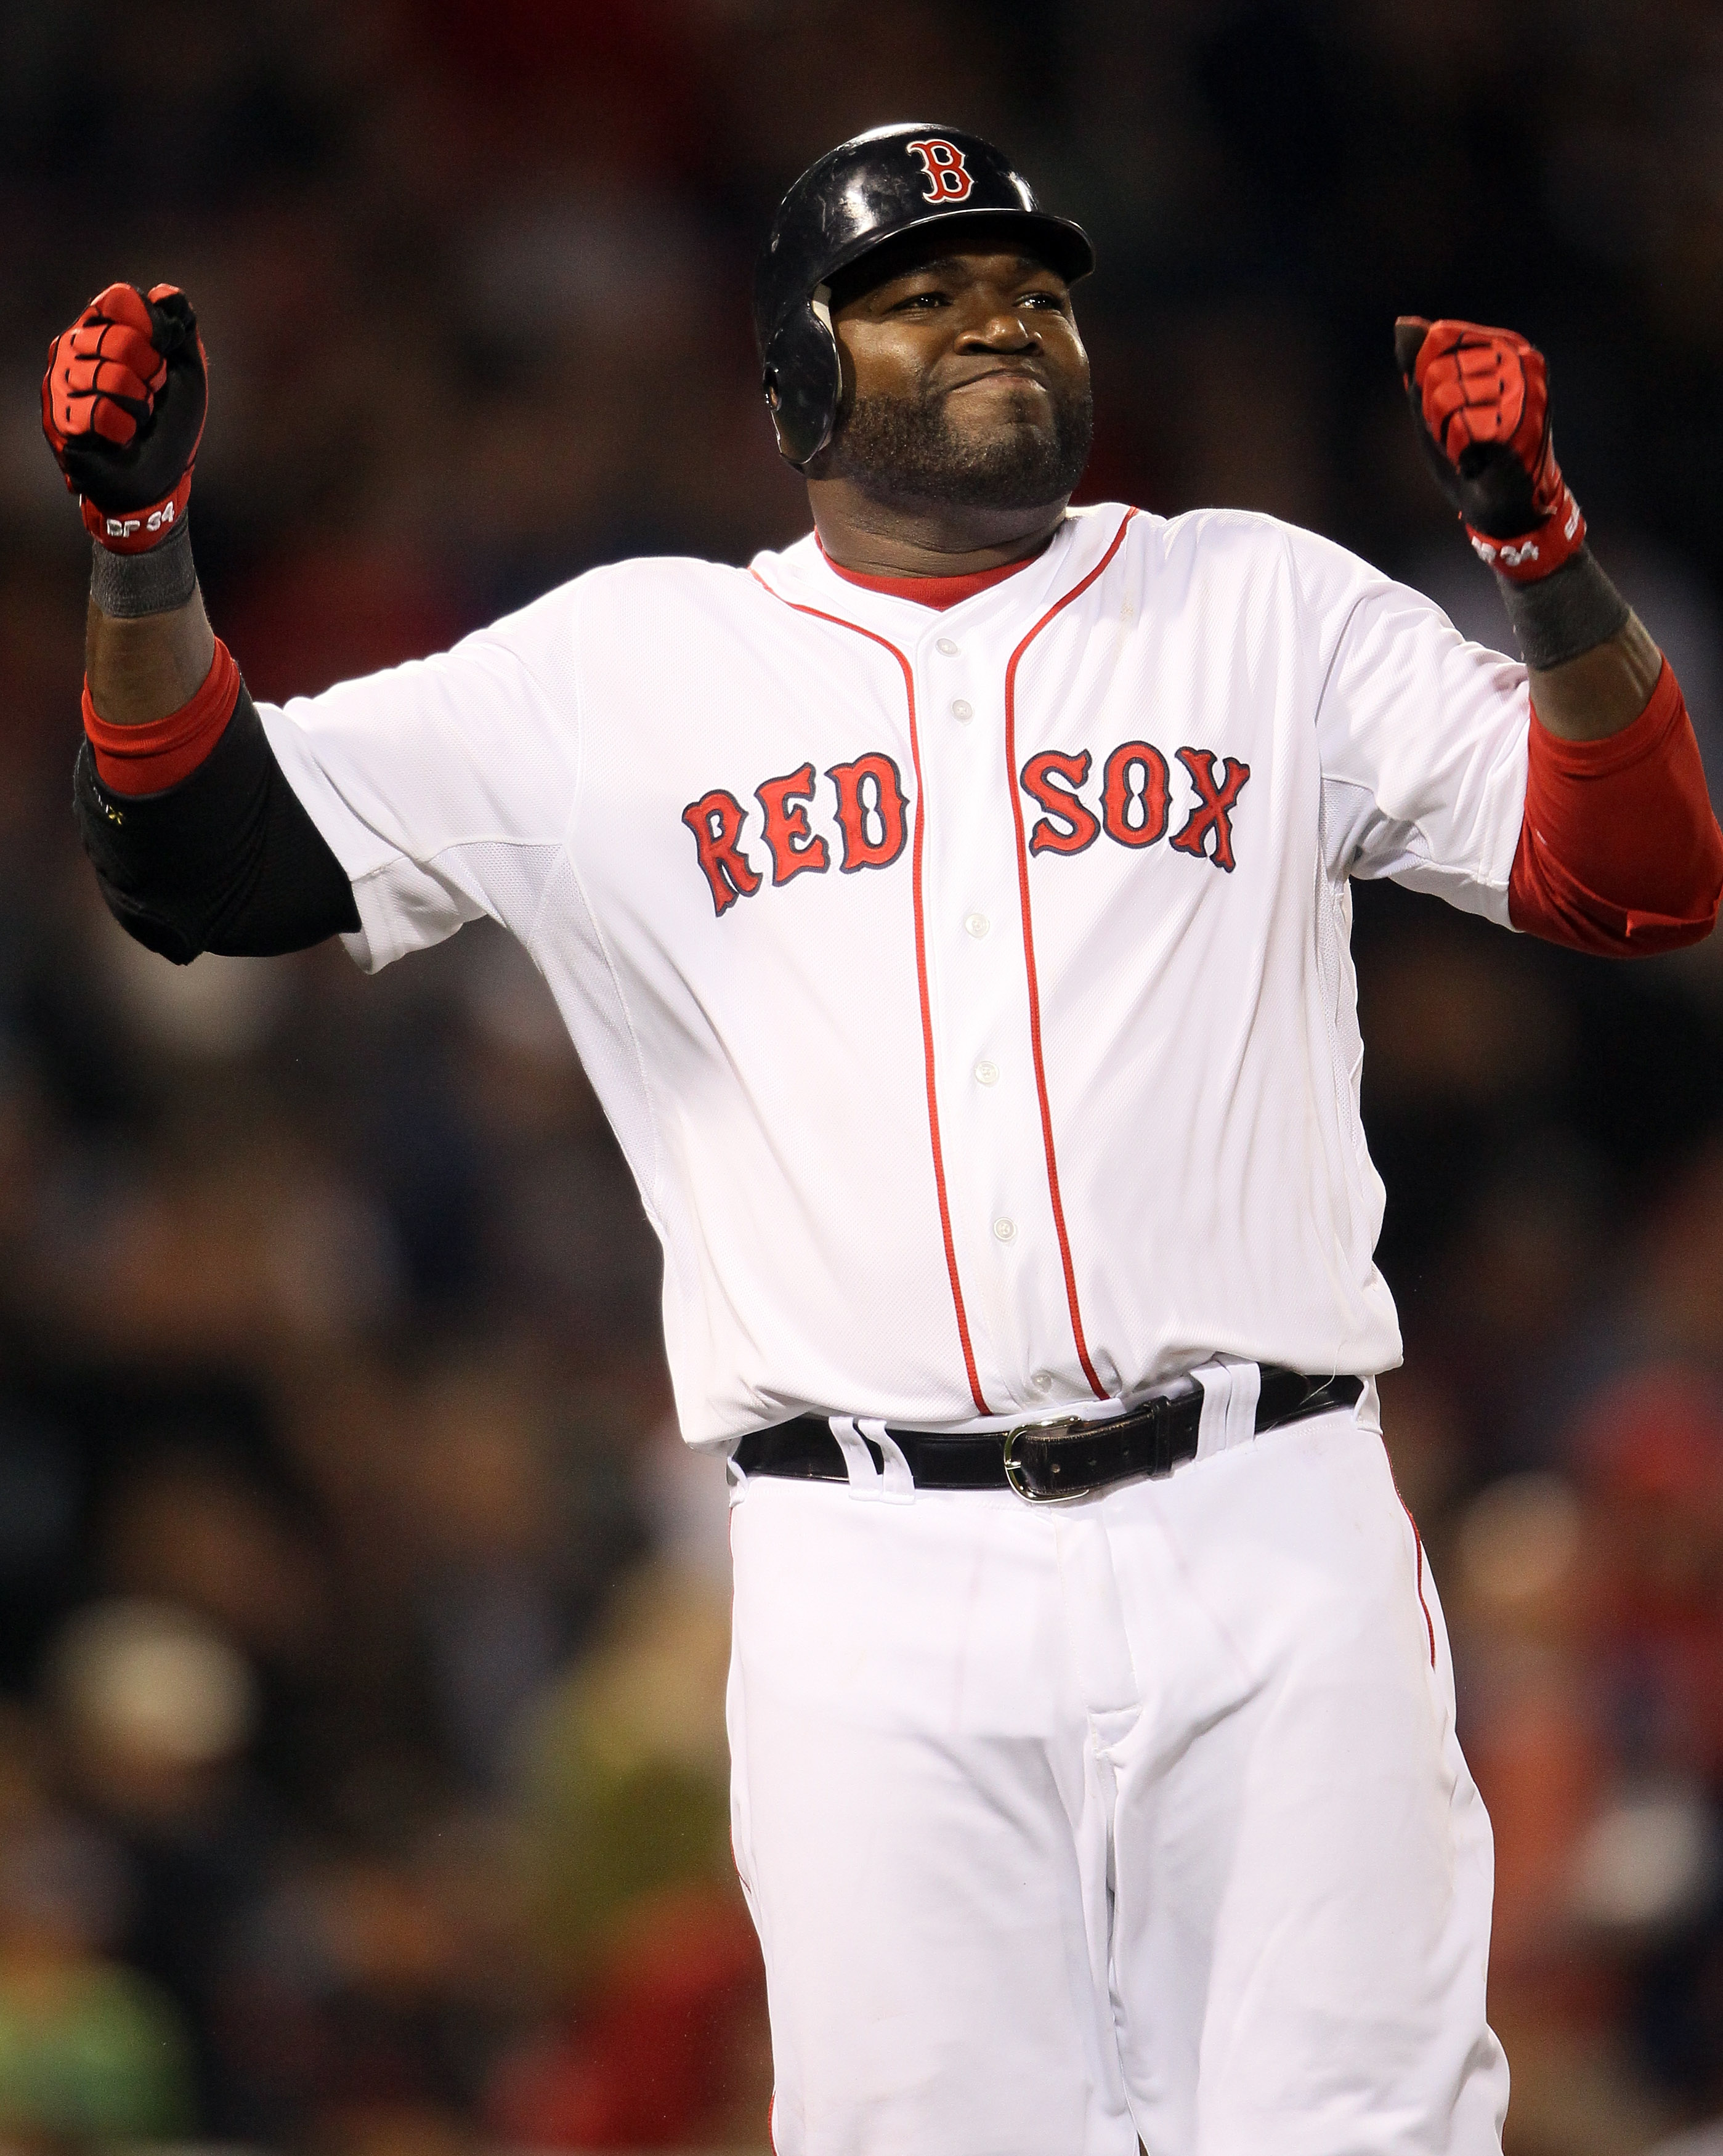 BOSTON, MA - APRIL 30: David Ortiz #34 of the Boston Red Sox reacts after hit a fly out against the Seattle Mariners on April 30, 2011 at Fenway Park in Boston, Massachusetts.  (Photo by Elsa/Getty Images)